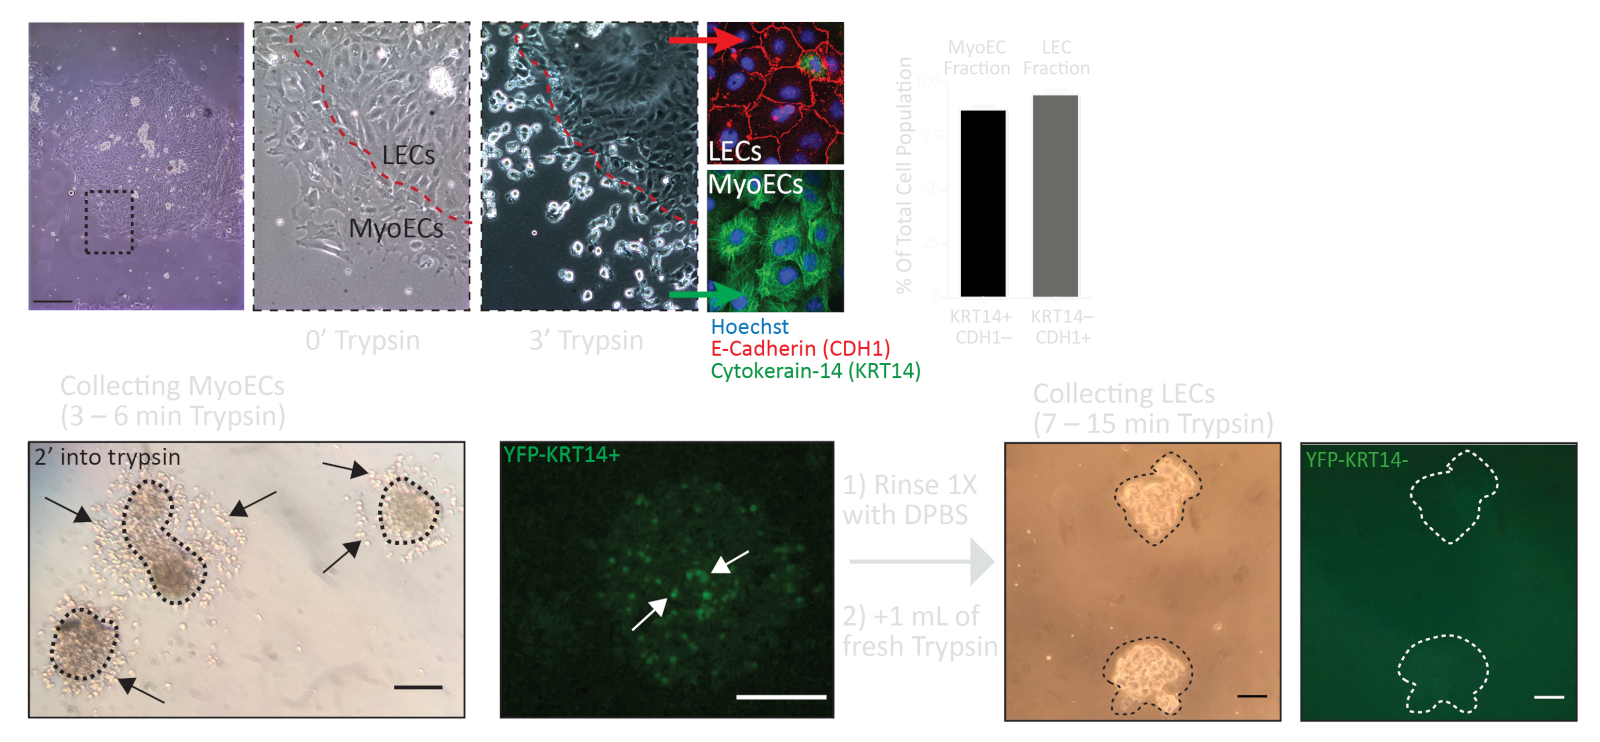 Generation of Mosaic Mammary Organoids by Differential